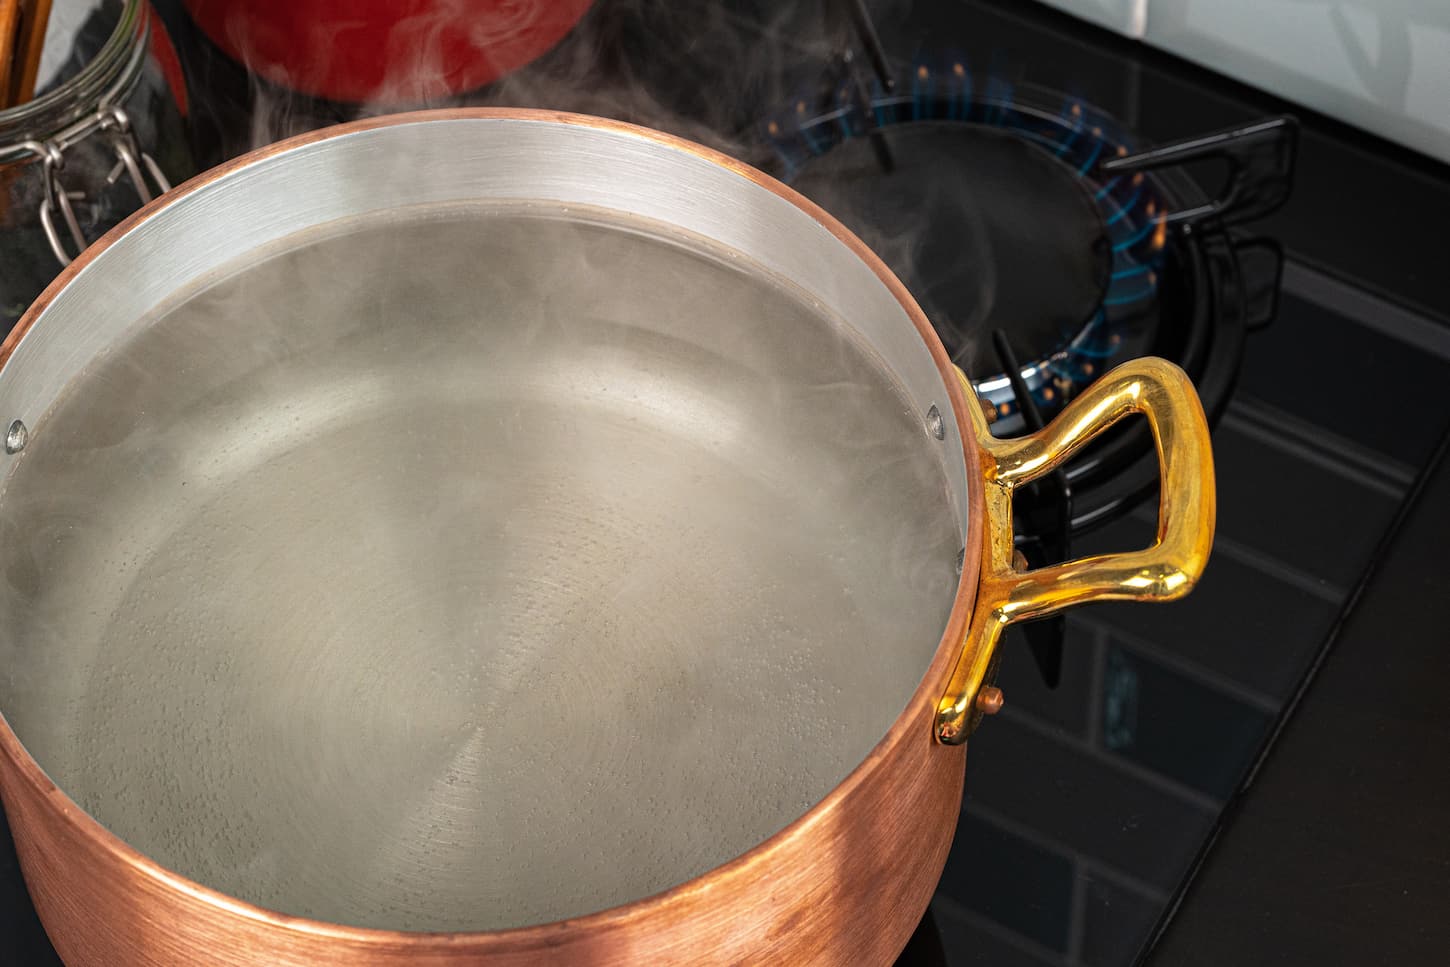 An image of a Copper pot with boiling water on a gas stove.